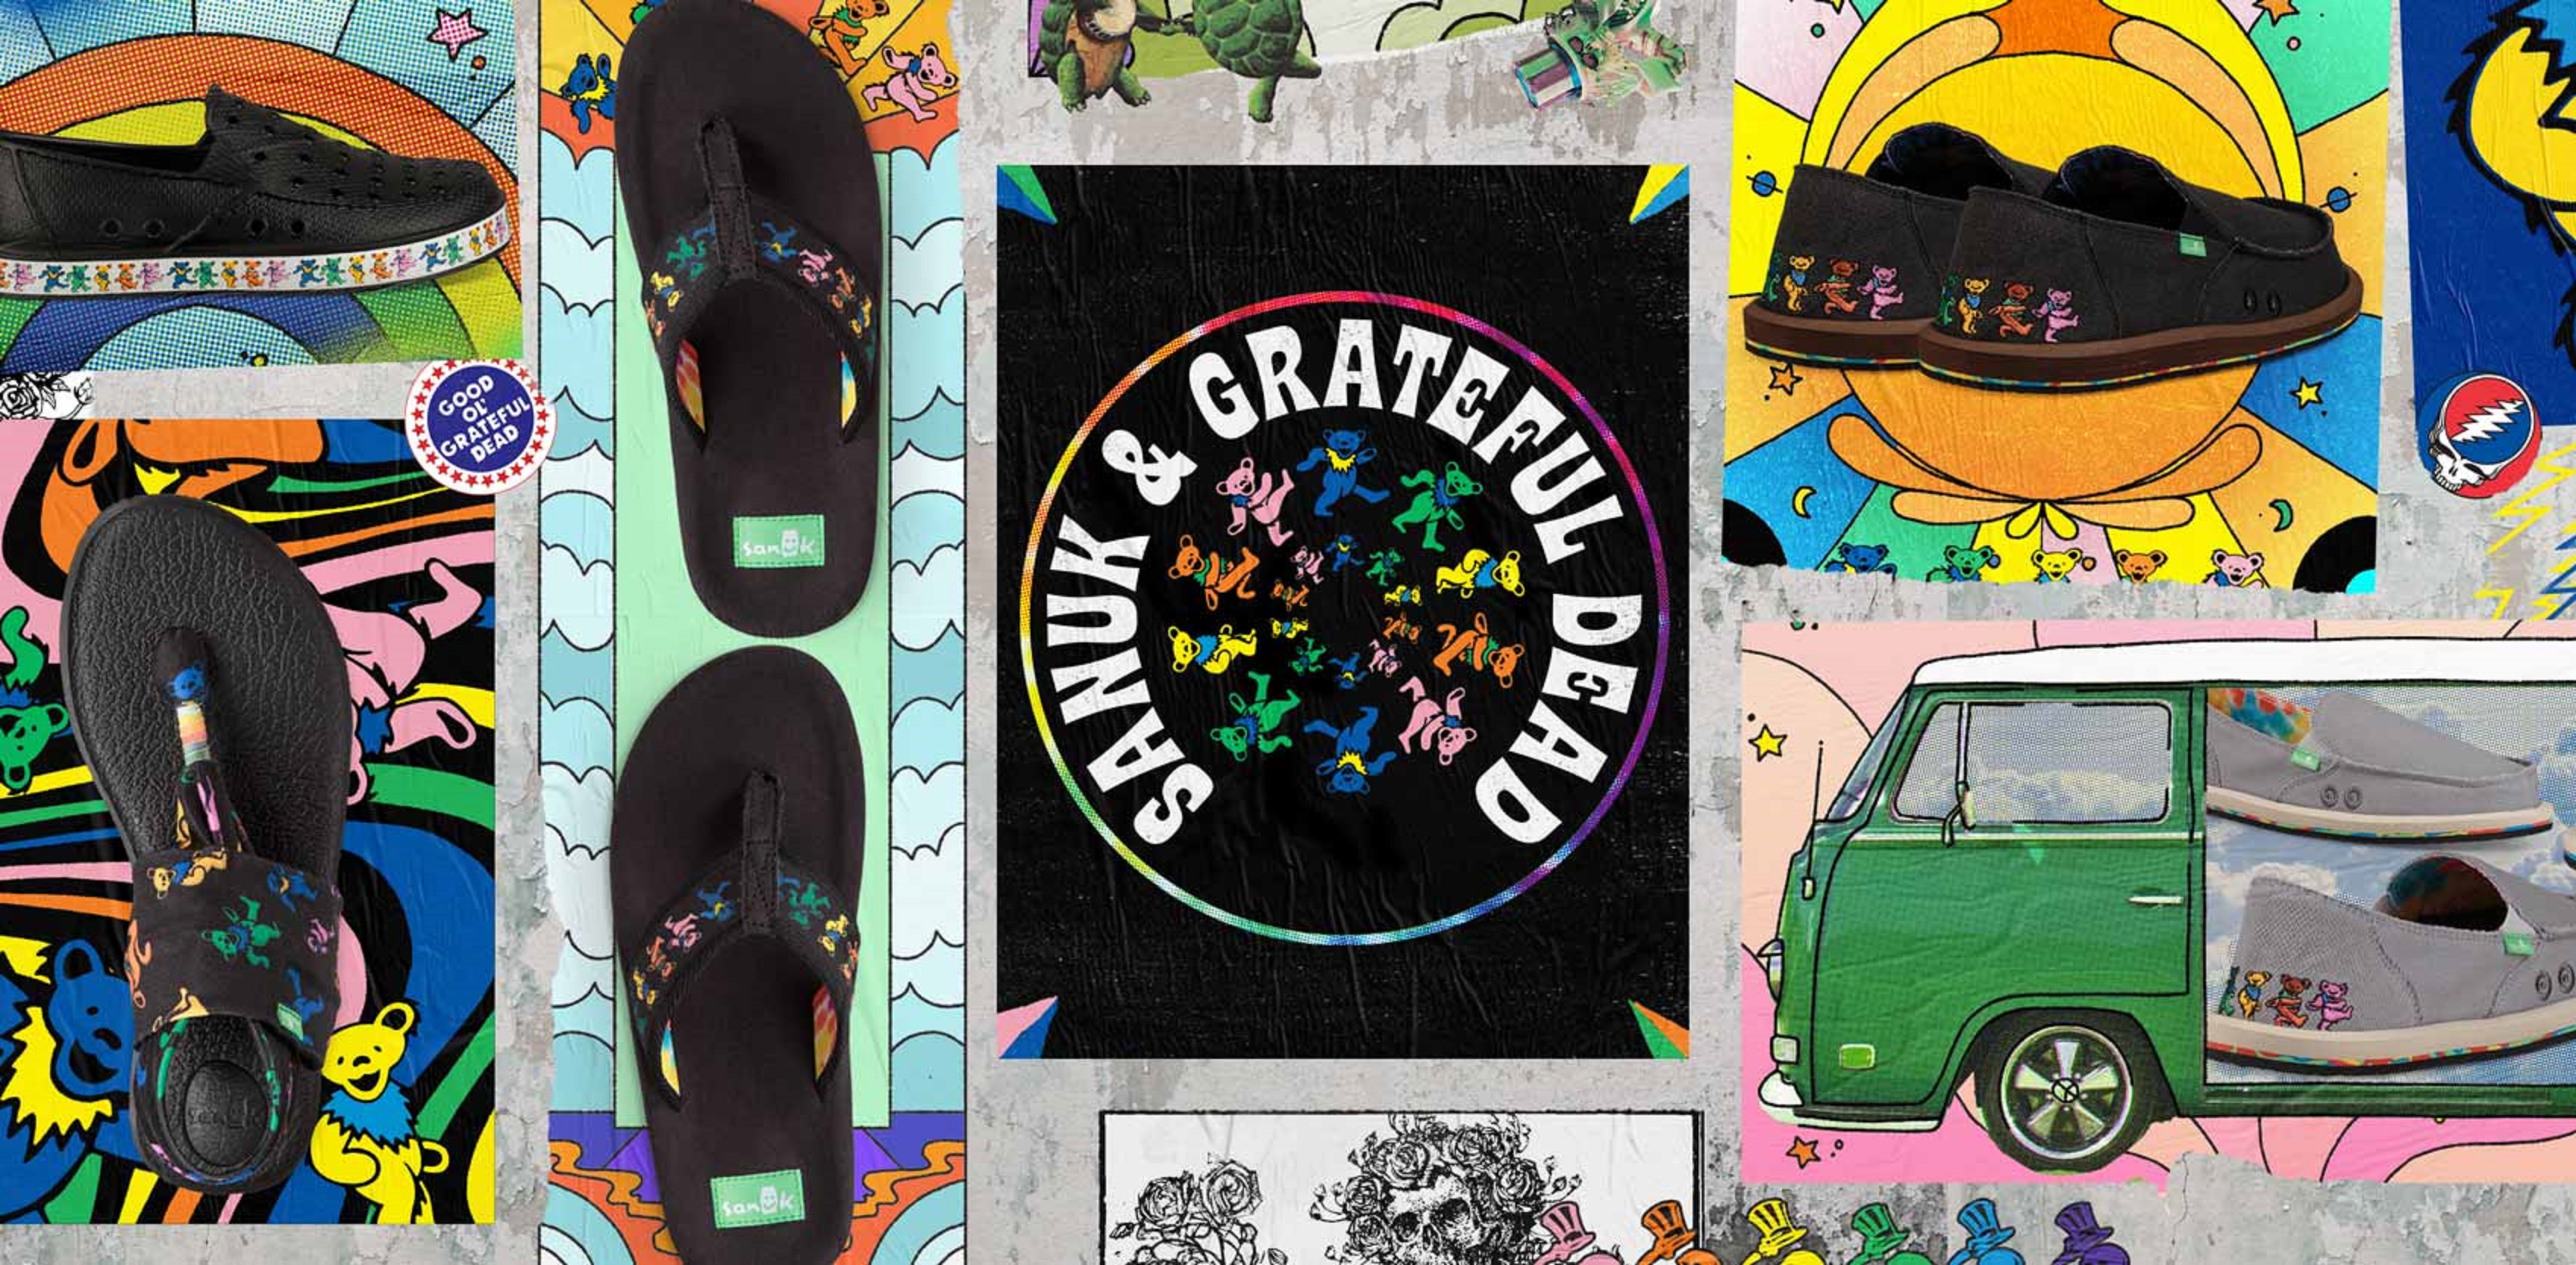 All-New Sanuk x Grateful Dead Collection to Dropped on February 4, 2020